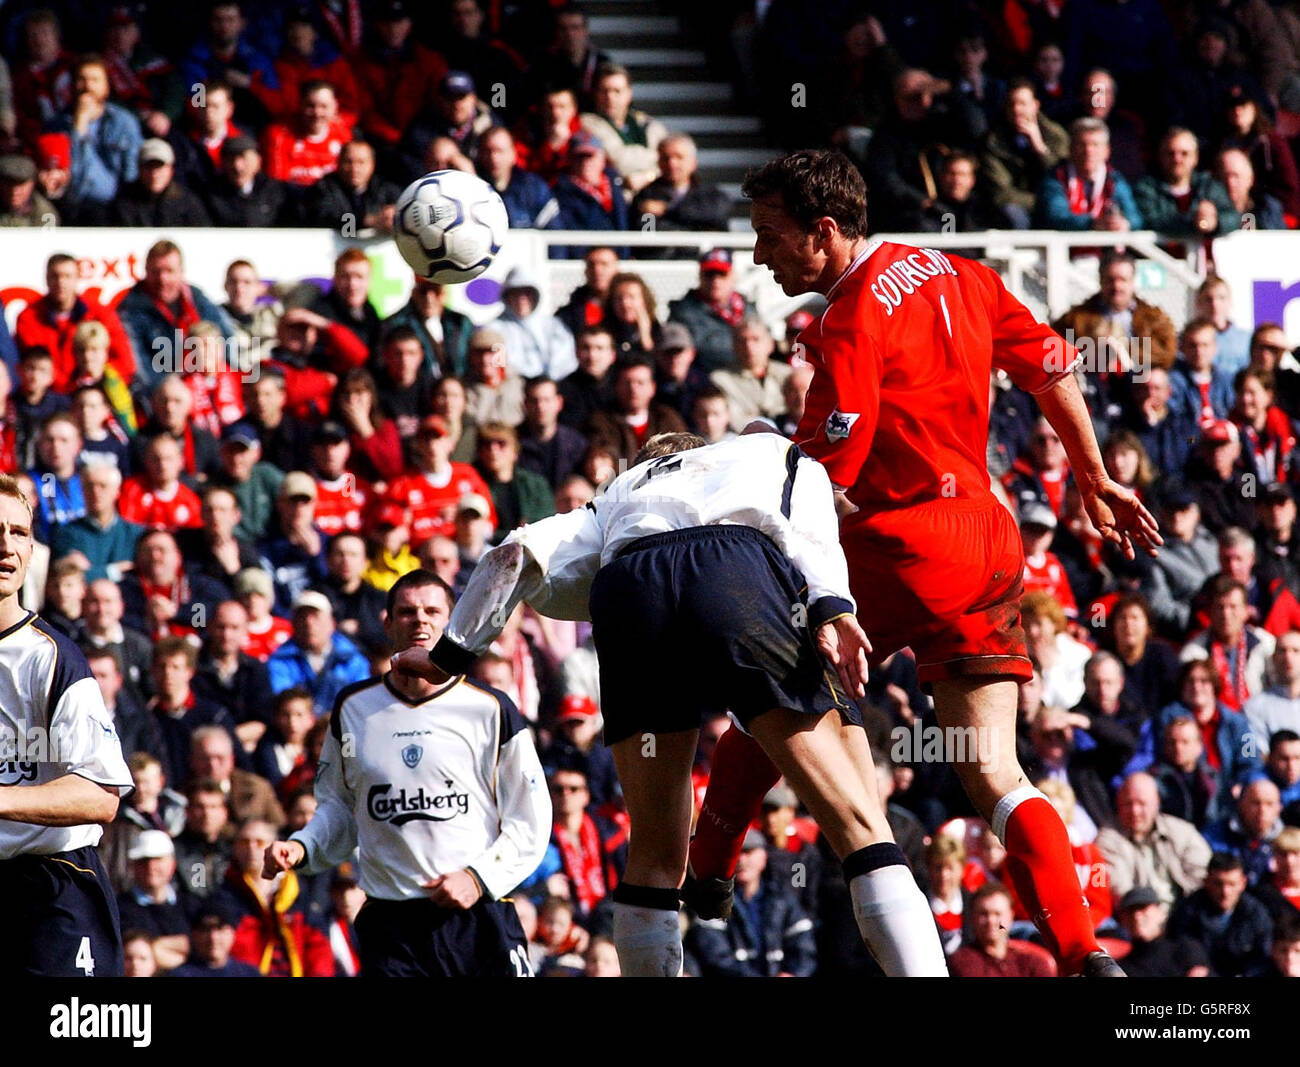 Middlesbrough's Gareth Southgate heads a goal against Liverpool during their FA Barclaycard Premiership match at Middlesbrough's Cellnet Riverside Stadium. Liverpool won the match 2-1. * Stock Photo